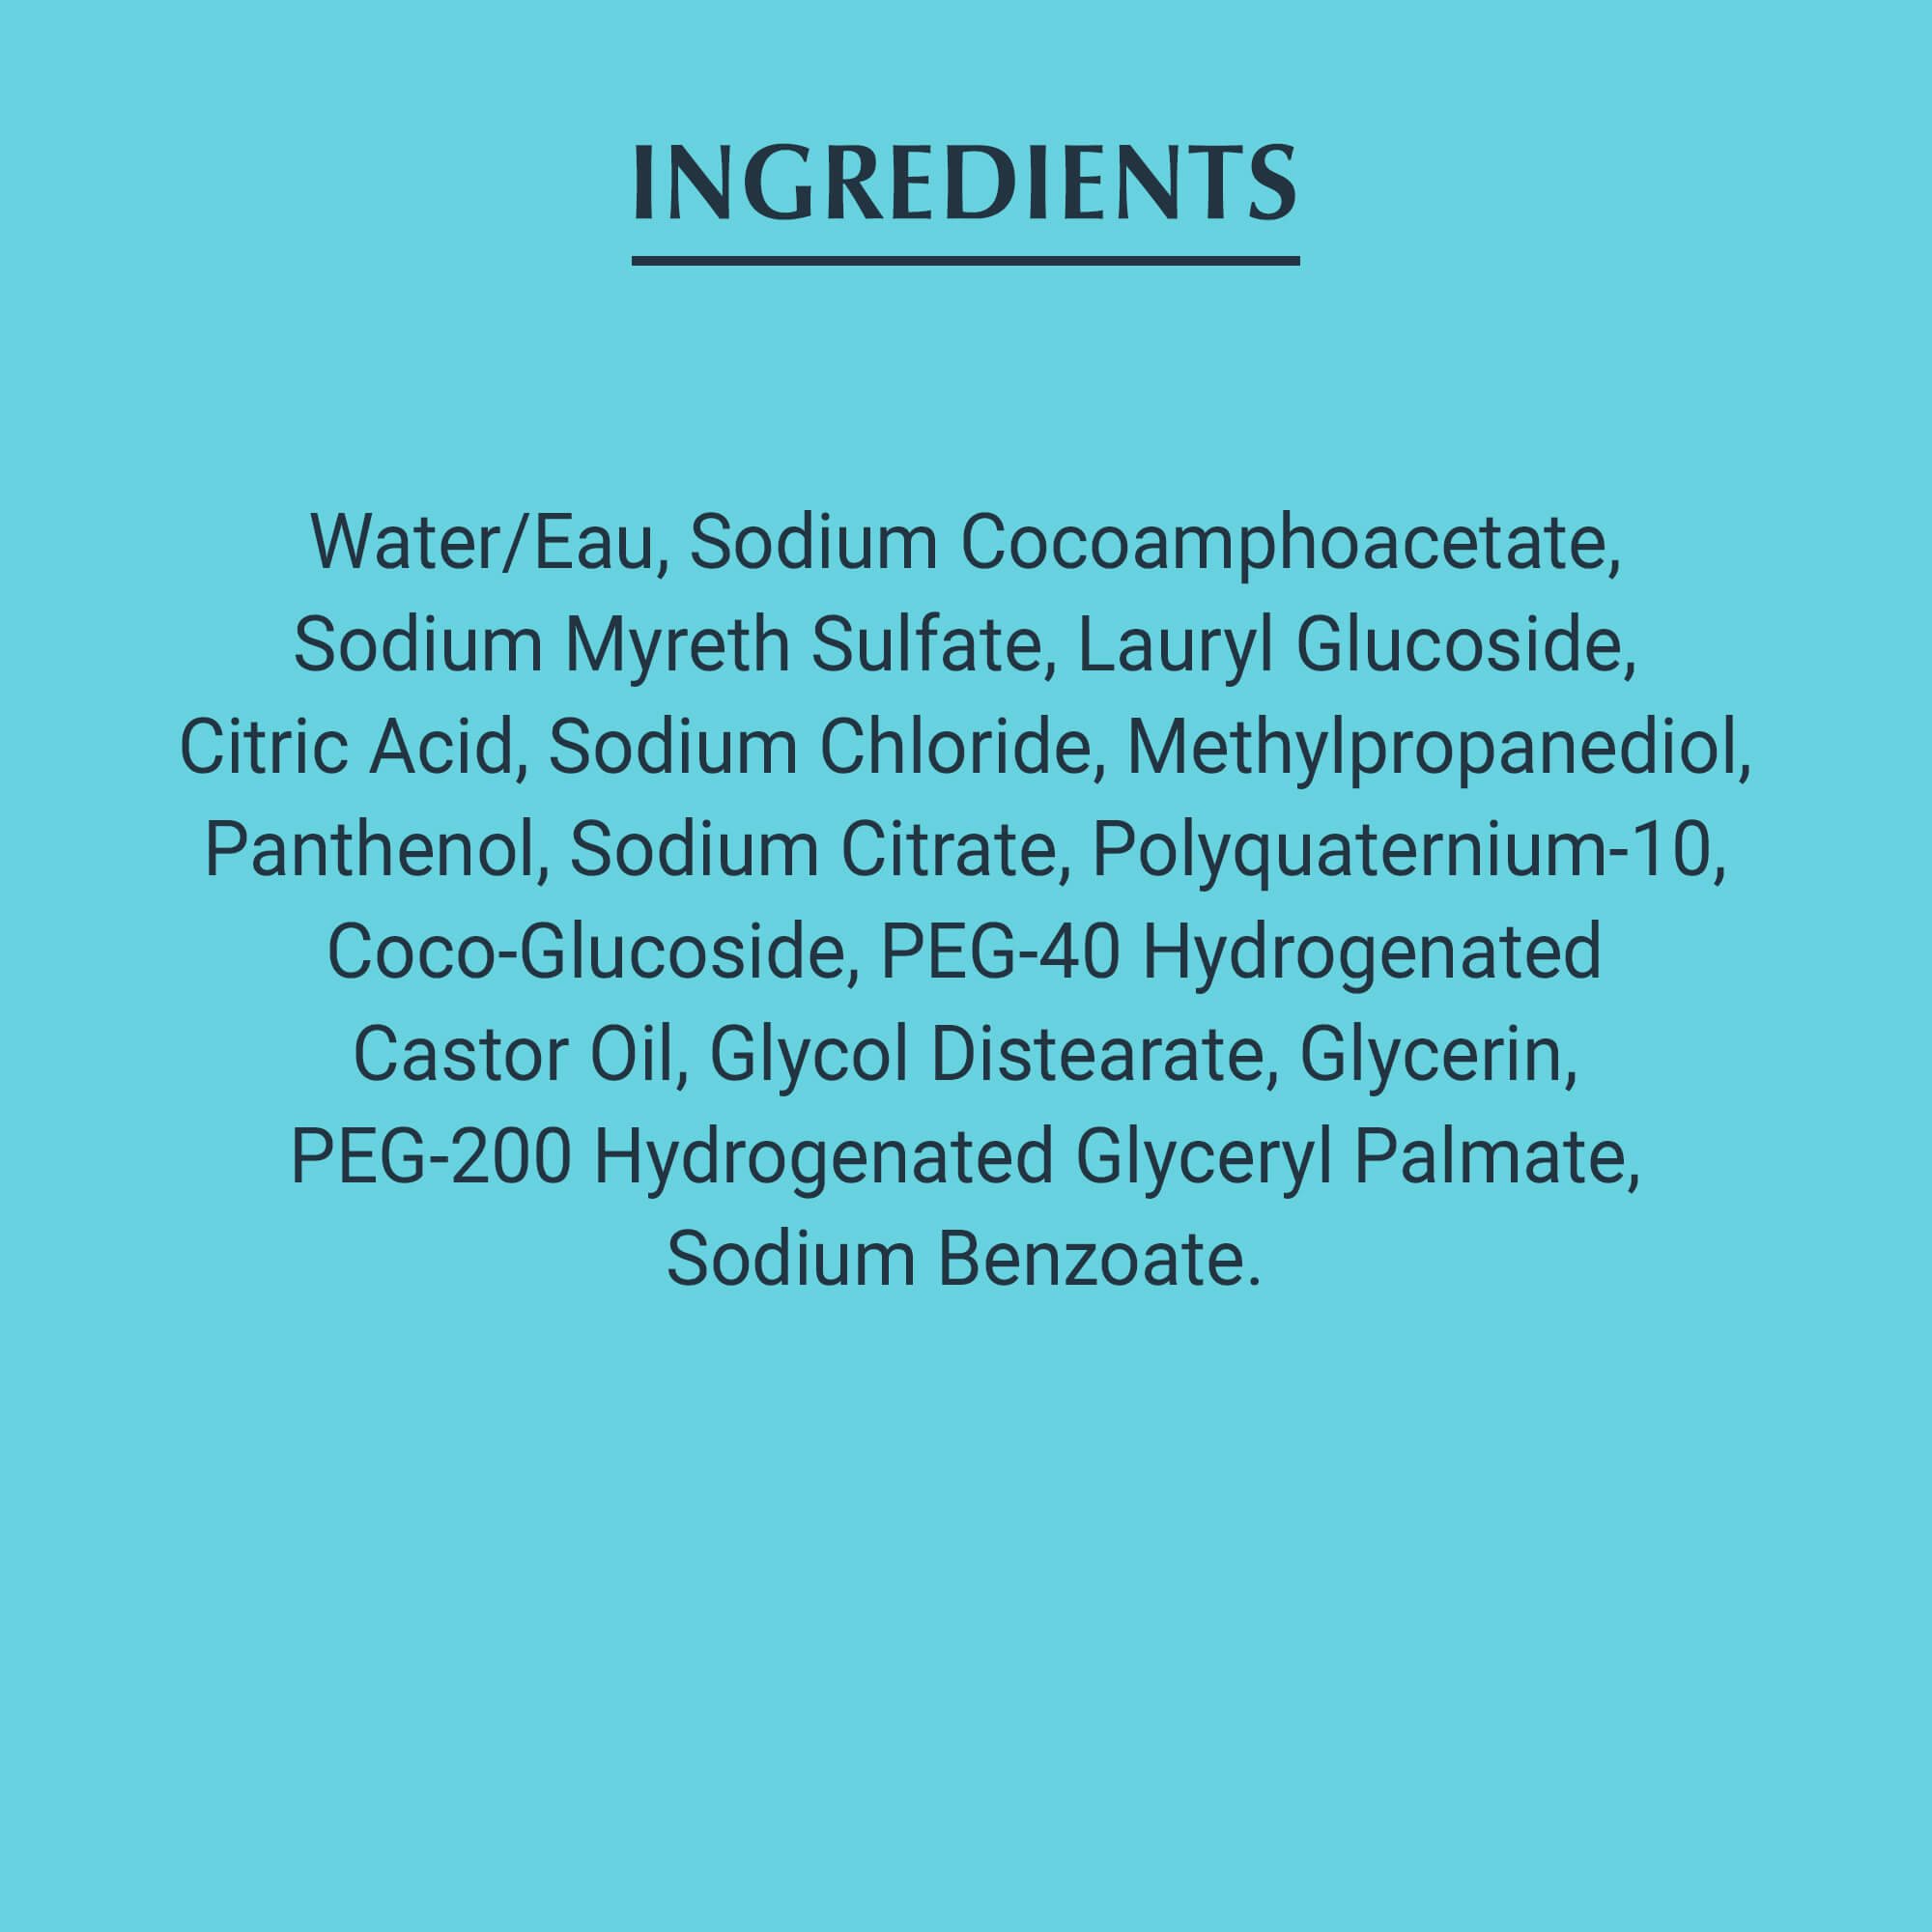 Image of The Eucerin Complete Repair Cleanser Ingredients list on a bright teal background.